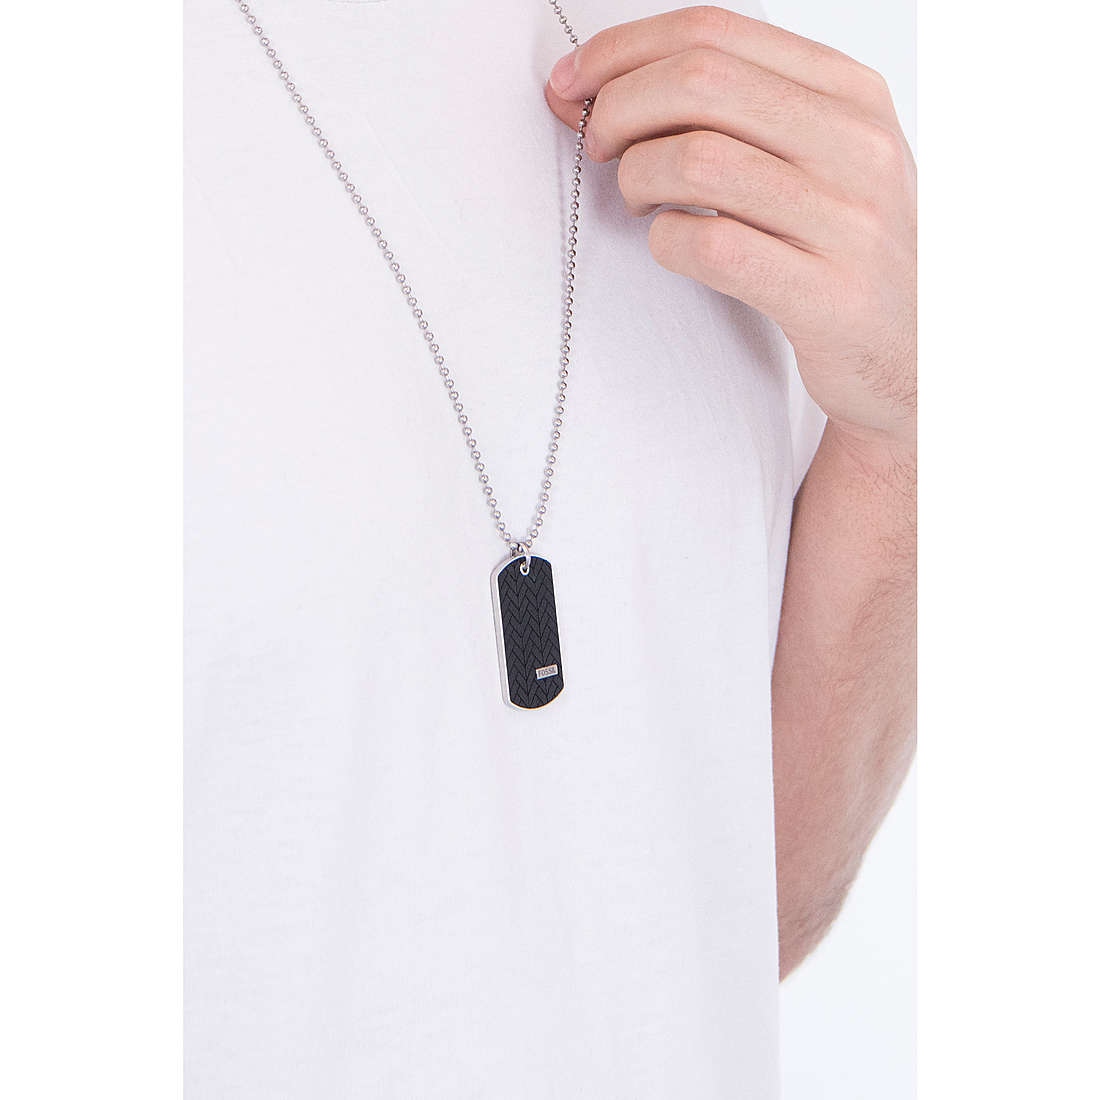 Fossil necklaces Spring 2020 man JF03395040 wearing